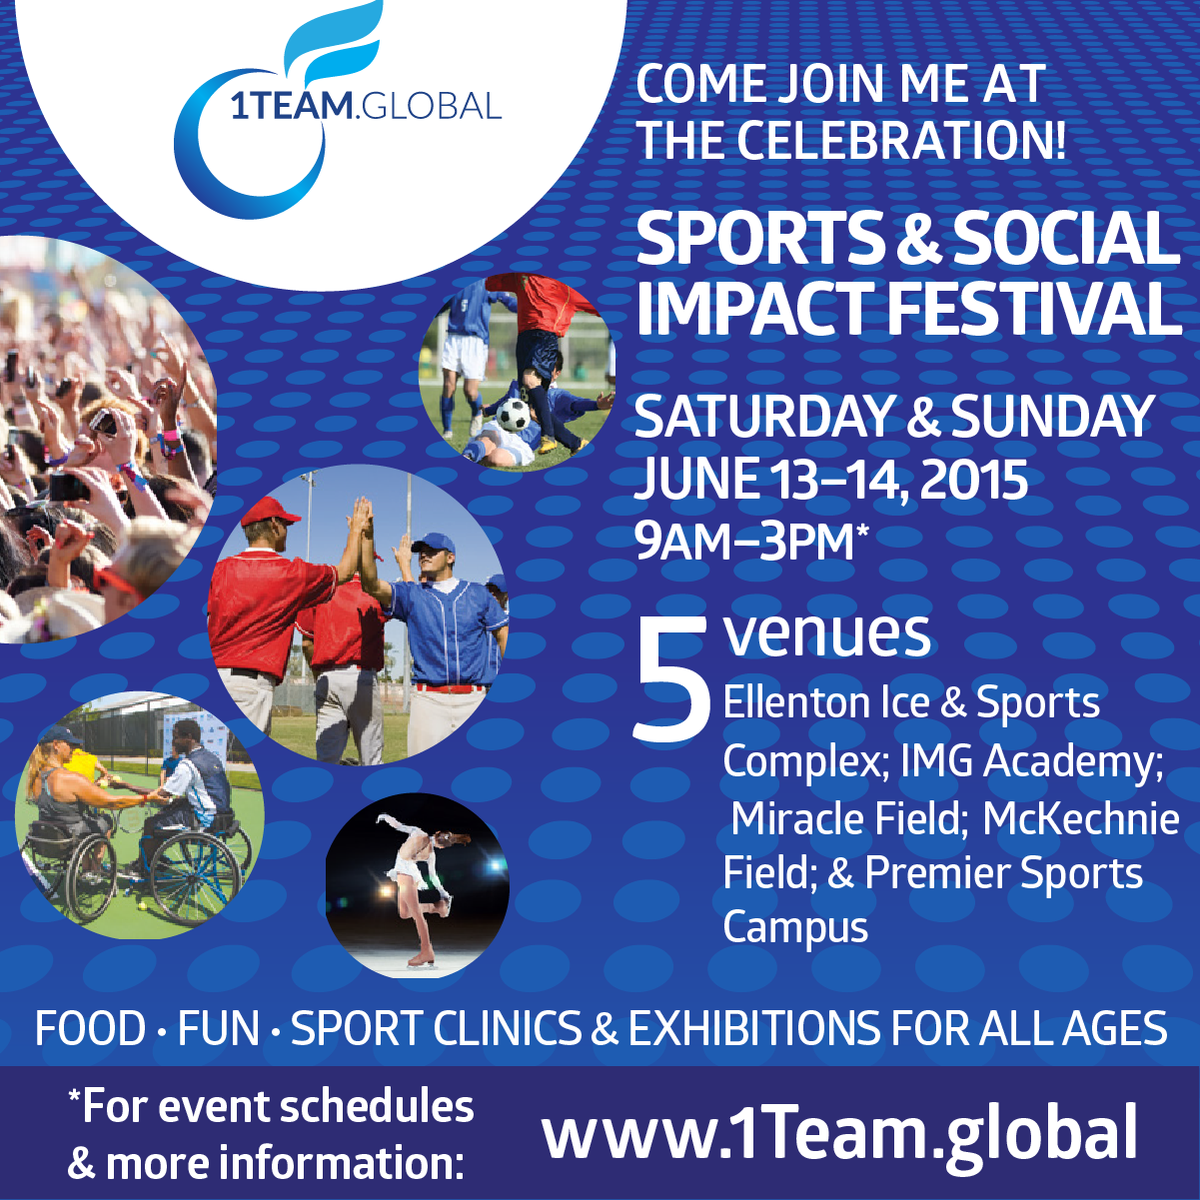 @PremierSCLWR  Rugby #thisweekend #Sport #SocialImpact Festival Attend 4 chance to win @IMGAcdemy Training